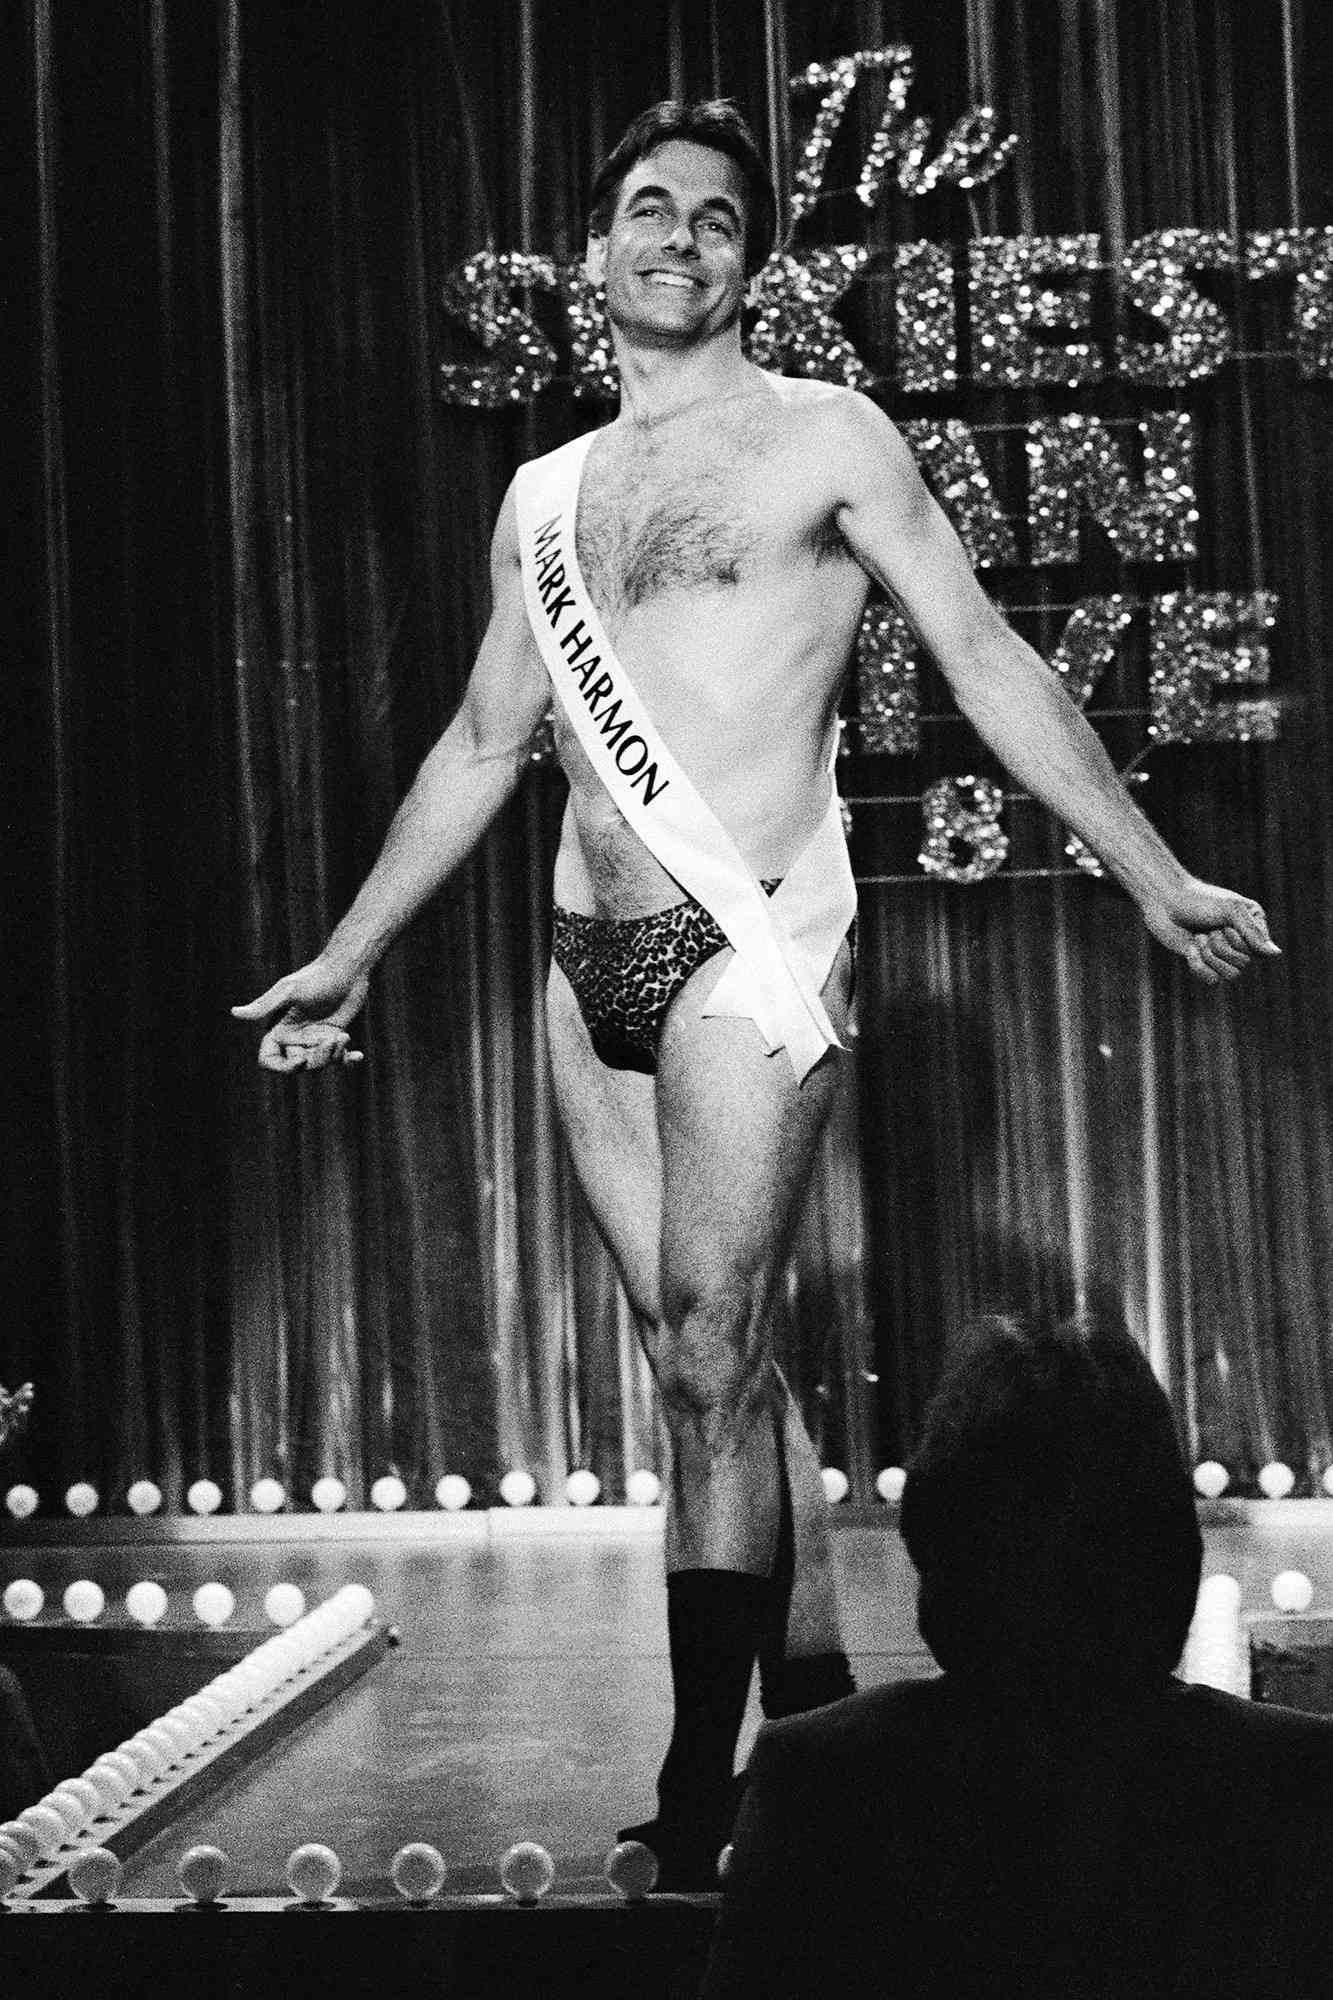 SATURDAY NIGHT LIVE -- Episode 18 -- Pictured: Mark Harmon during 'The Sexiest Man Alive 1986' skit on May 9, 1987 -- Photo by: Alan Singer/NBC/NBCU Photo Bank